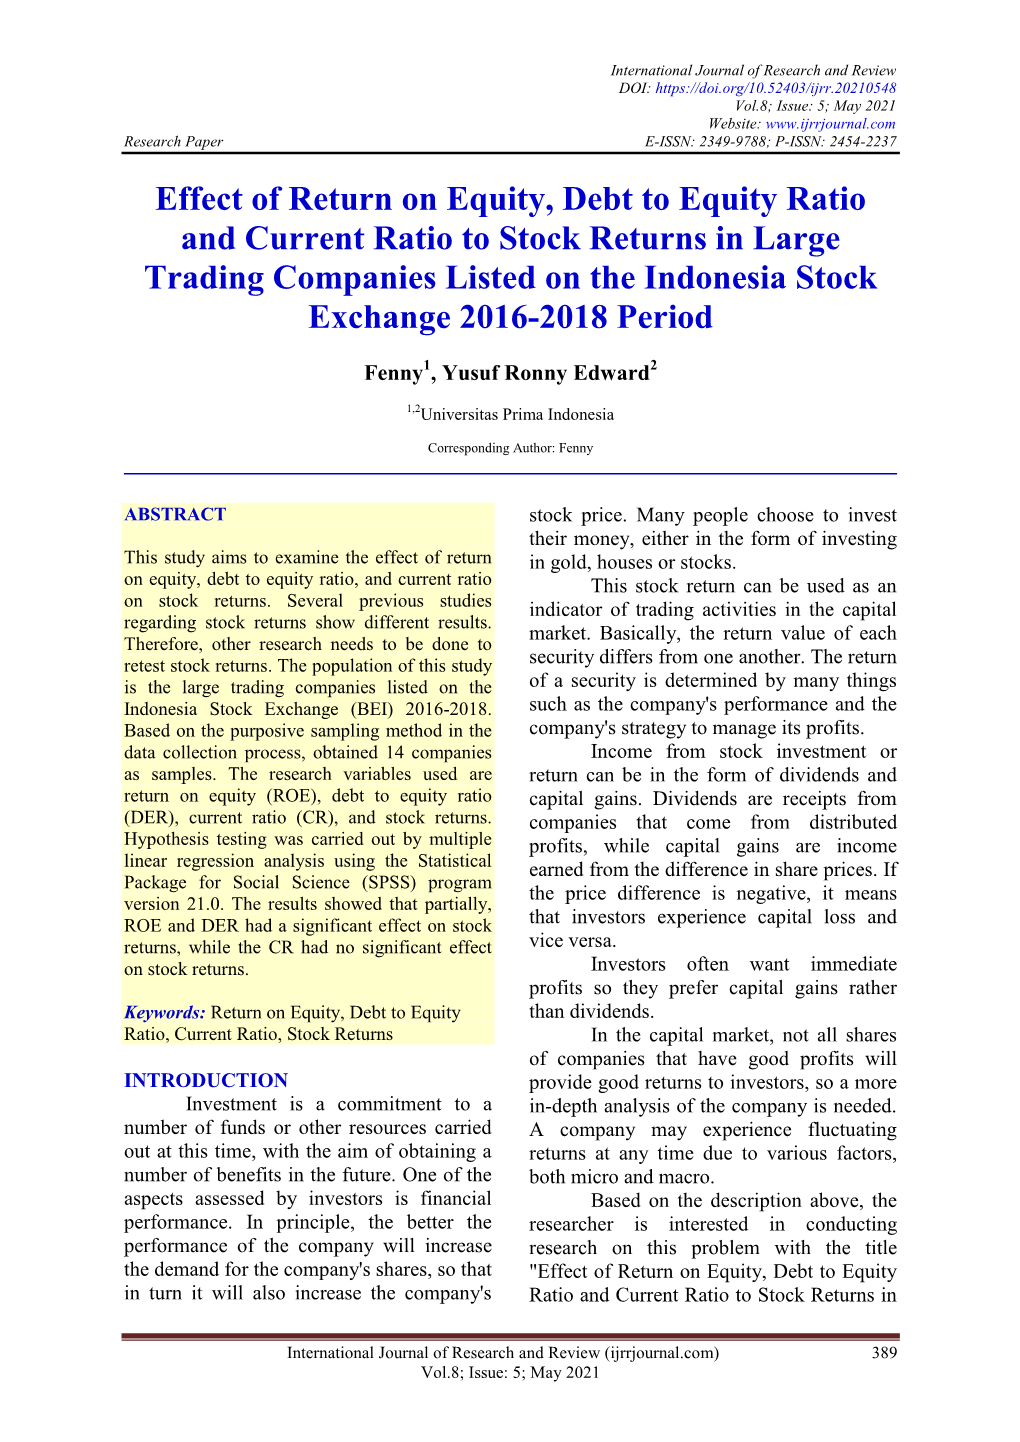 Effect of Return on Equity, Debt to Equity Ratio and Current Ratio To